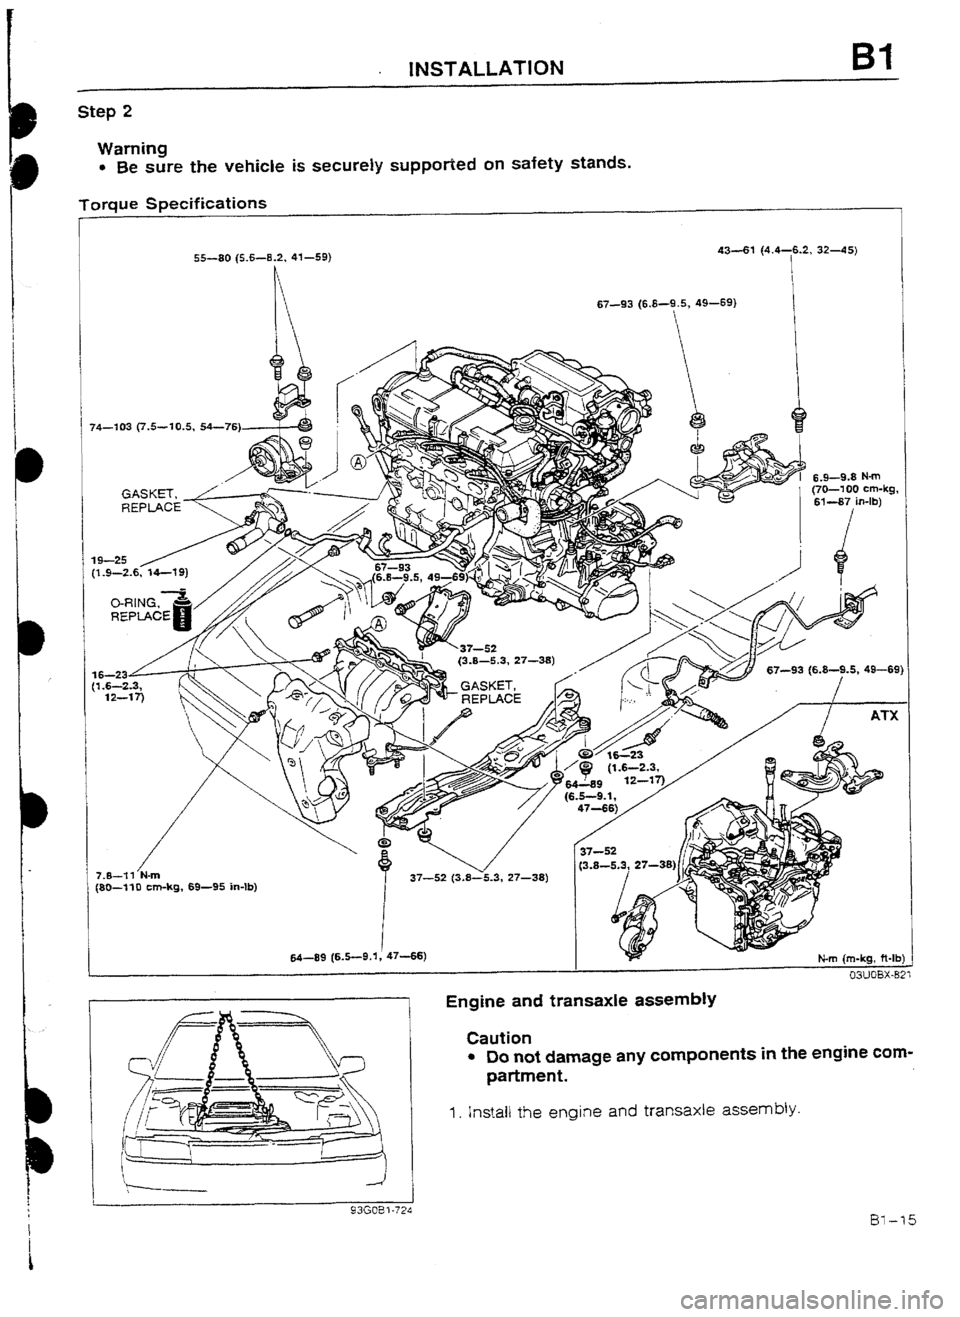 MAZDA 232 1990  Workshop Manual Suplement INSTALLATlON ES1 
Step 2 
Warning 
l Be sure the vehicle is securely suppofied on safety stands. 
Torque Specifications 
I 
I i 74-103 (7.5--10.5, 54-76) 
/ 7.8-?I N-m 
(80--flO cm-kg, 69-95 in-lb)  5